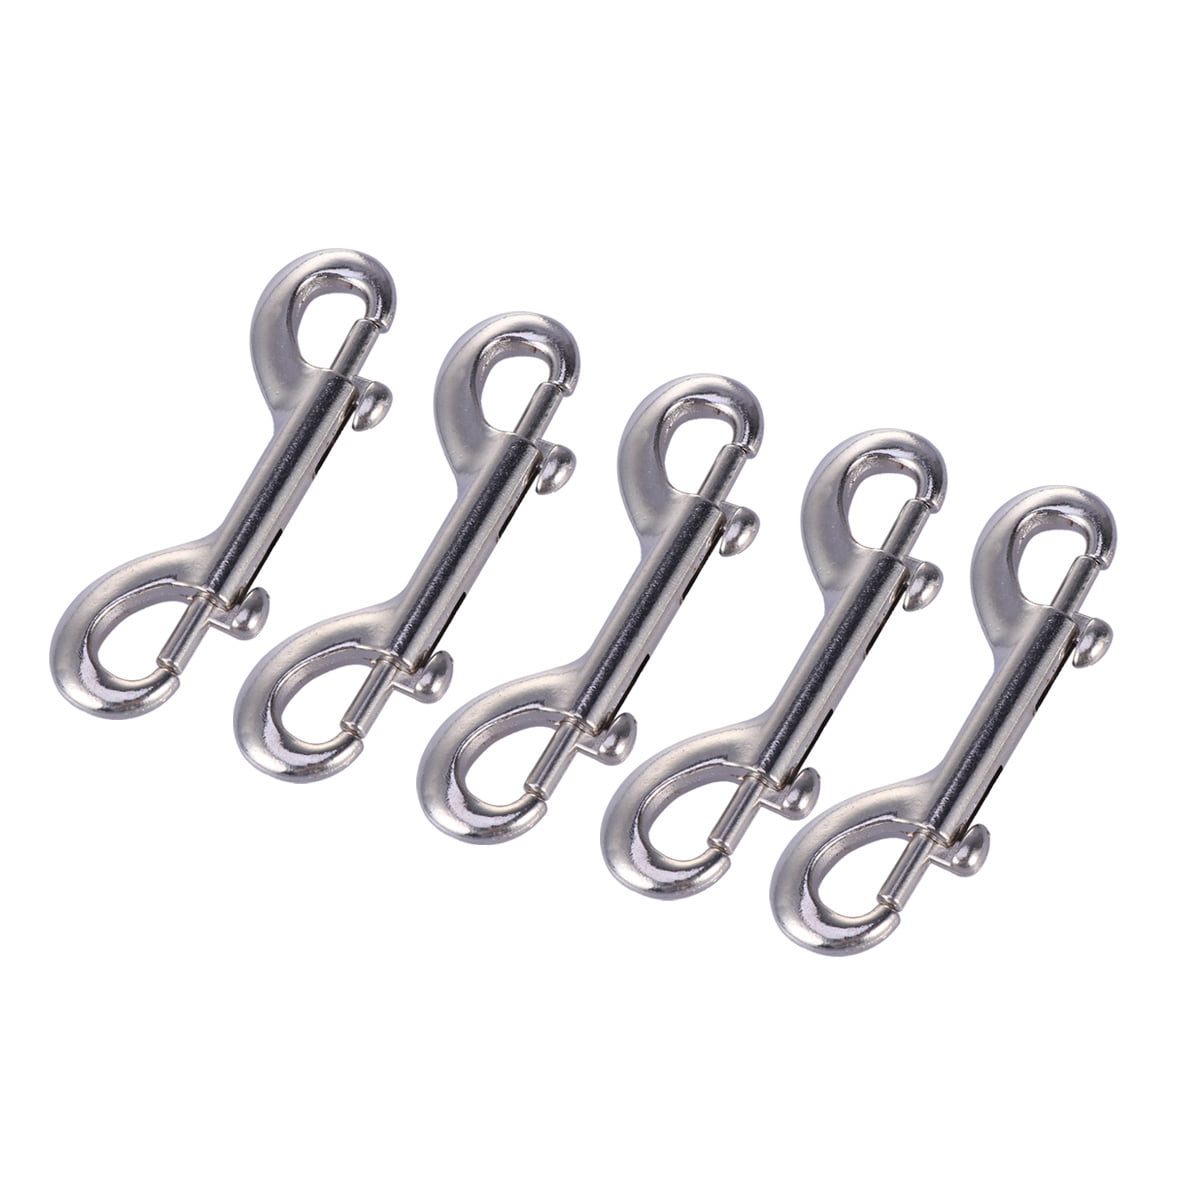 10pc Scuba Diving 32mm Stainless Steel Split Ring for BCD attachment 